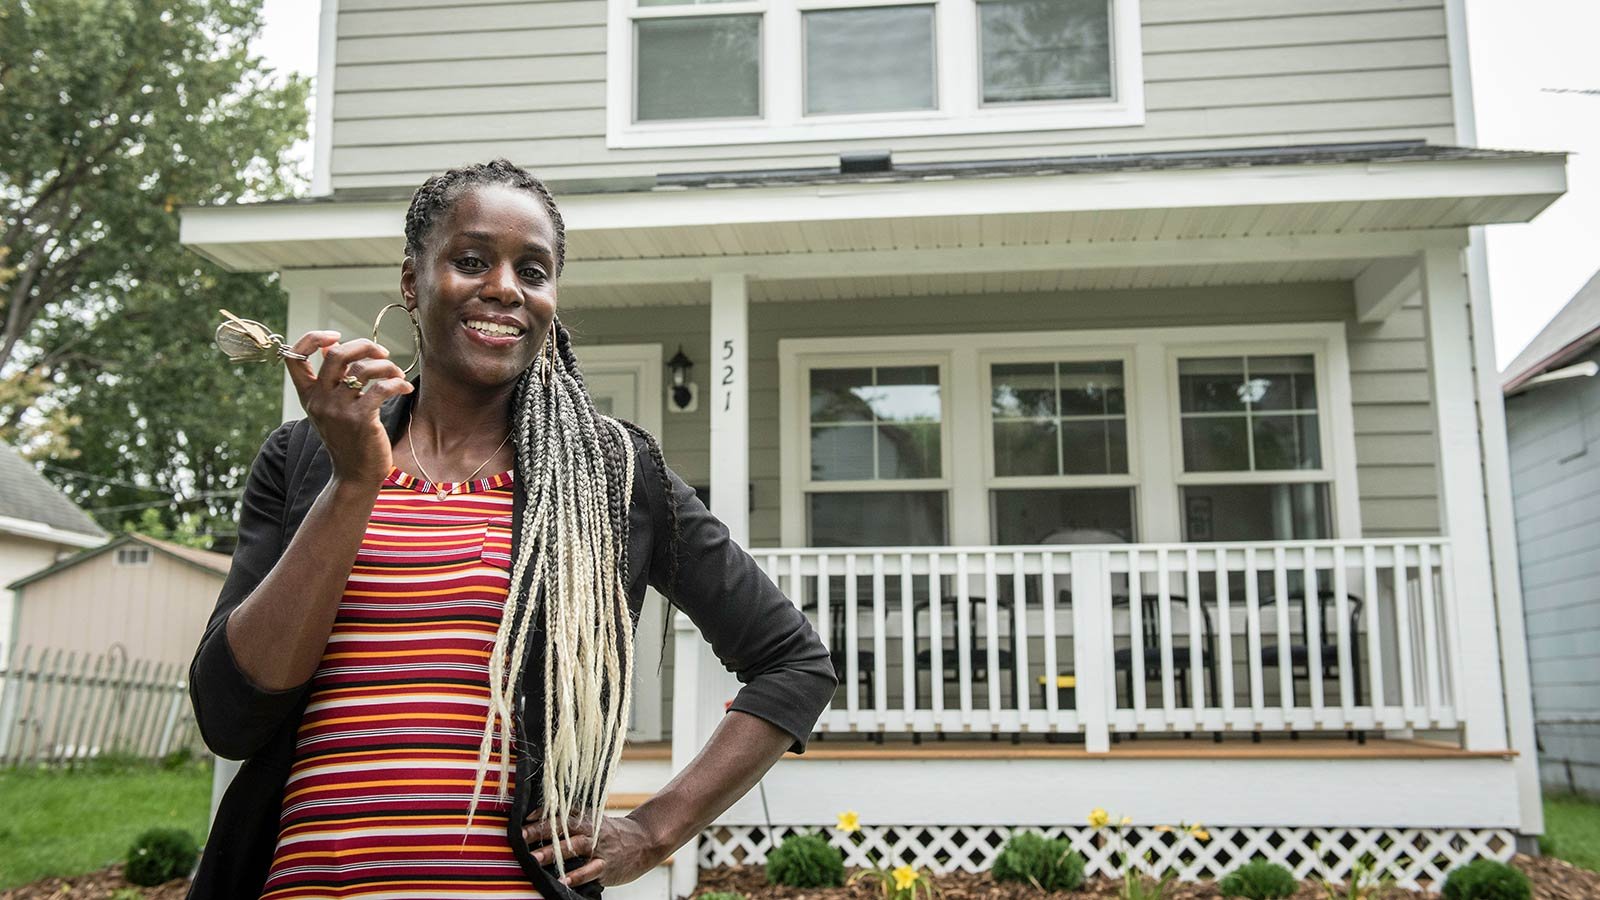 LeAndra smiling in front of her house with keys in hand.